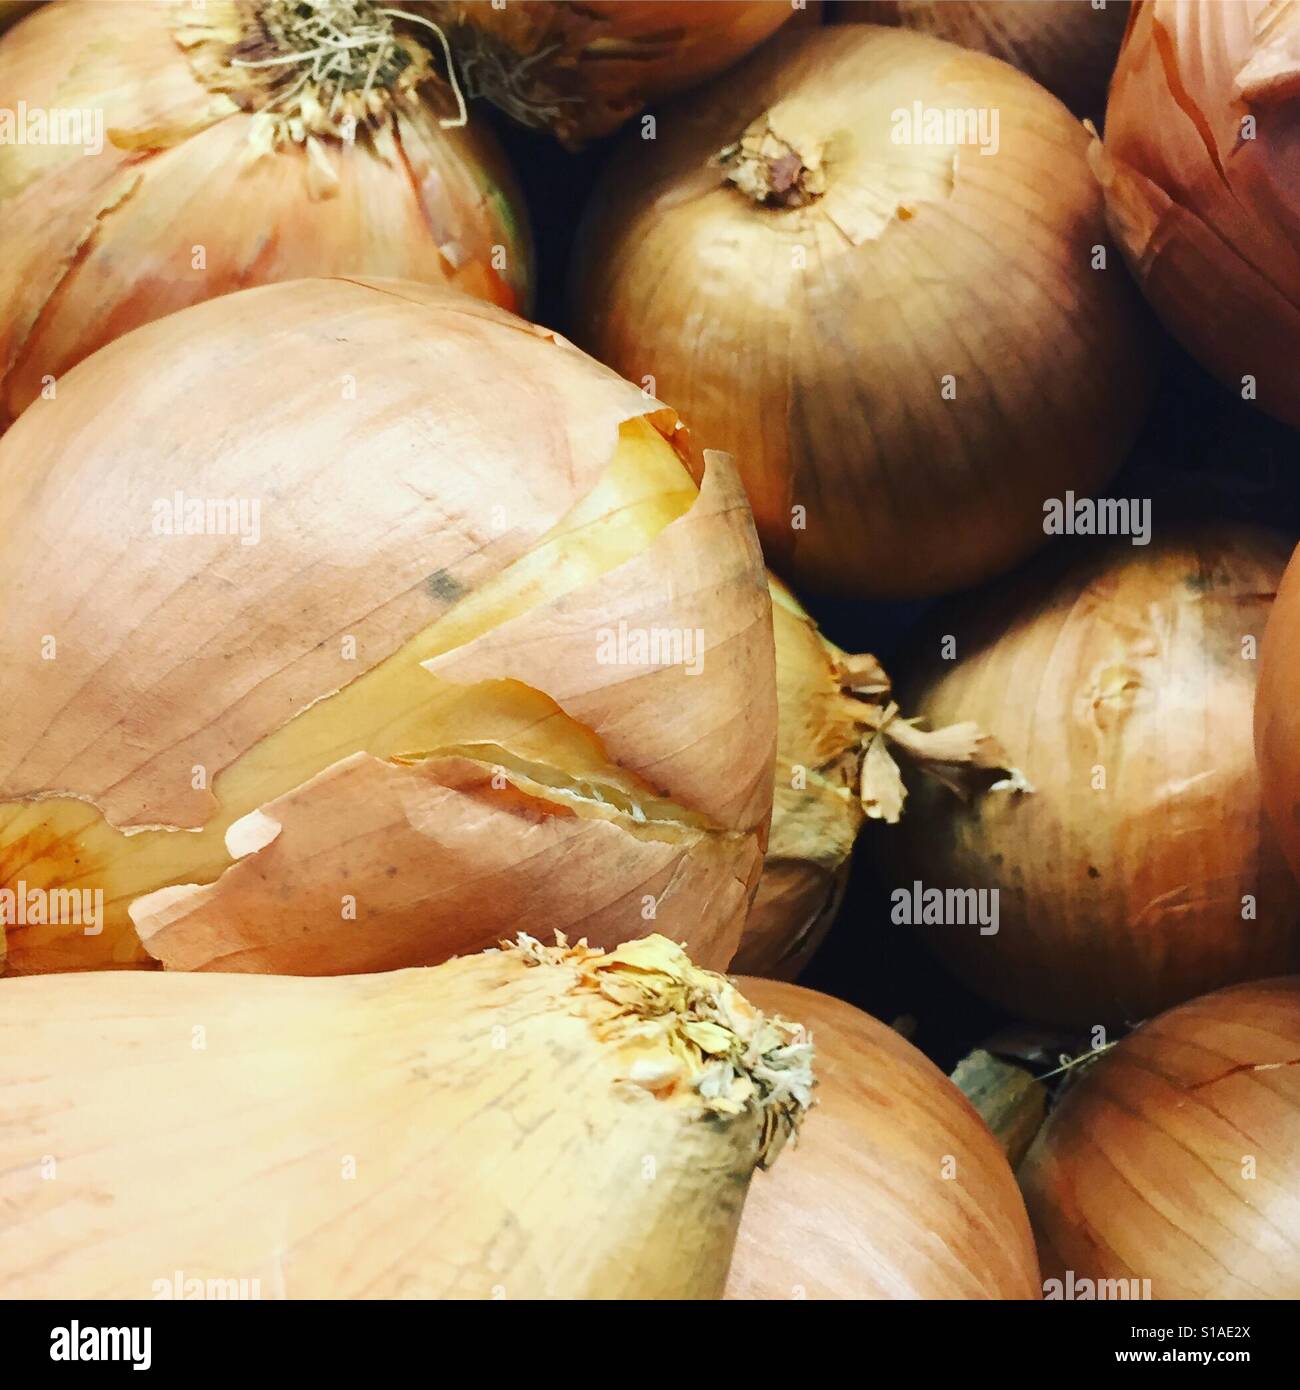 Onions by K.R. Stock Photo